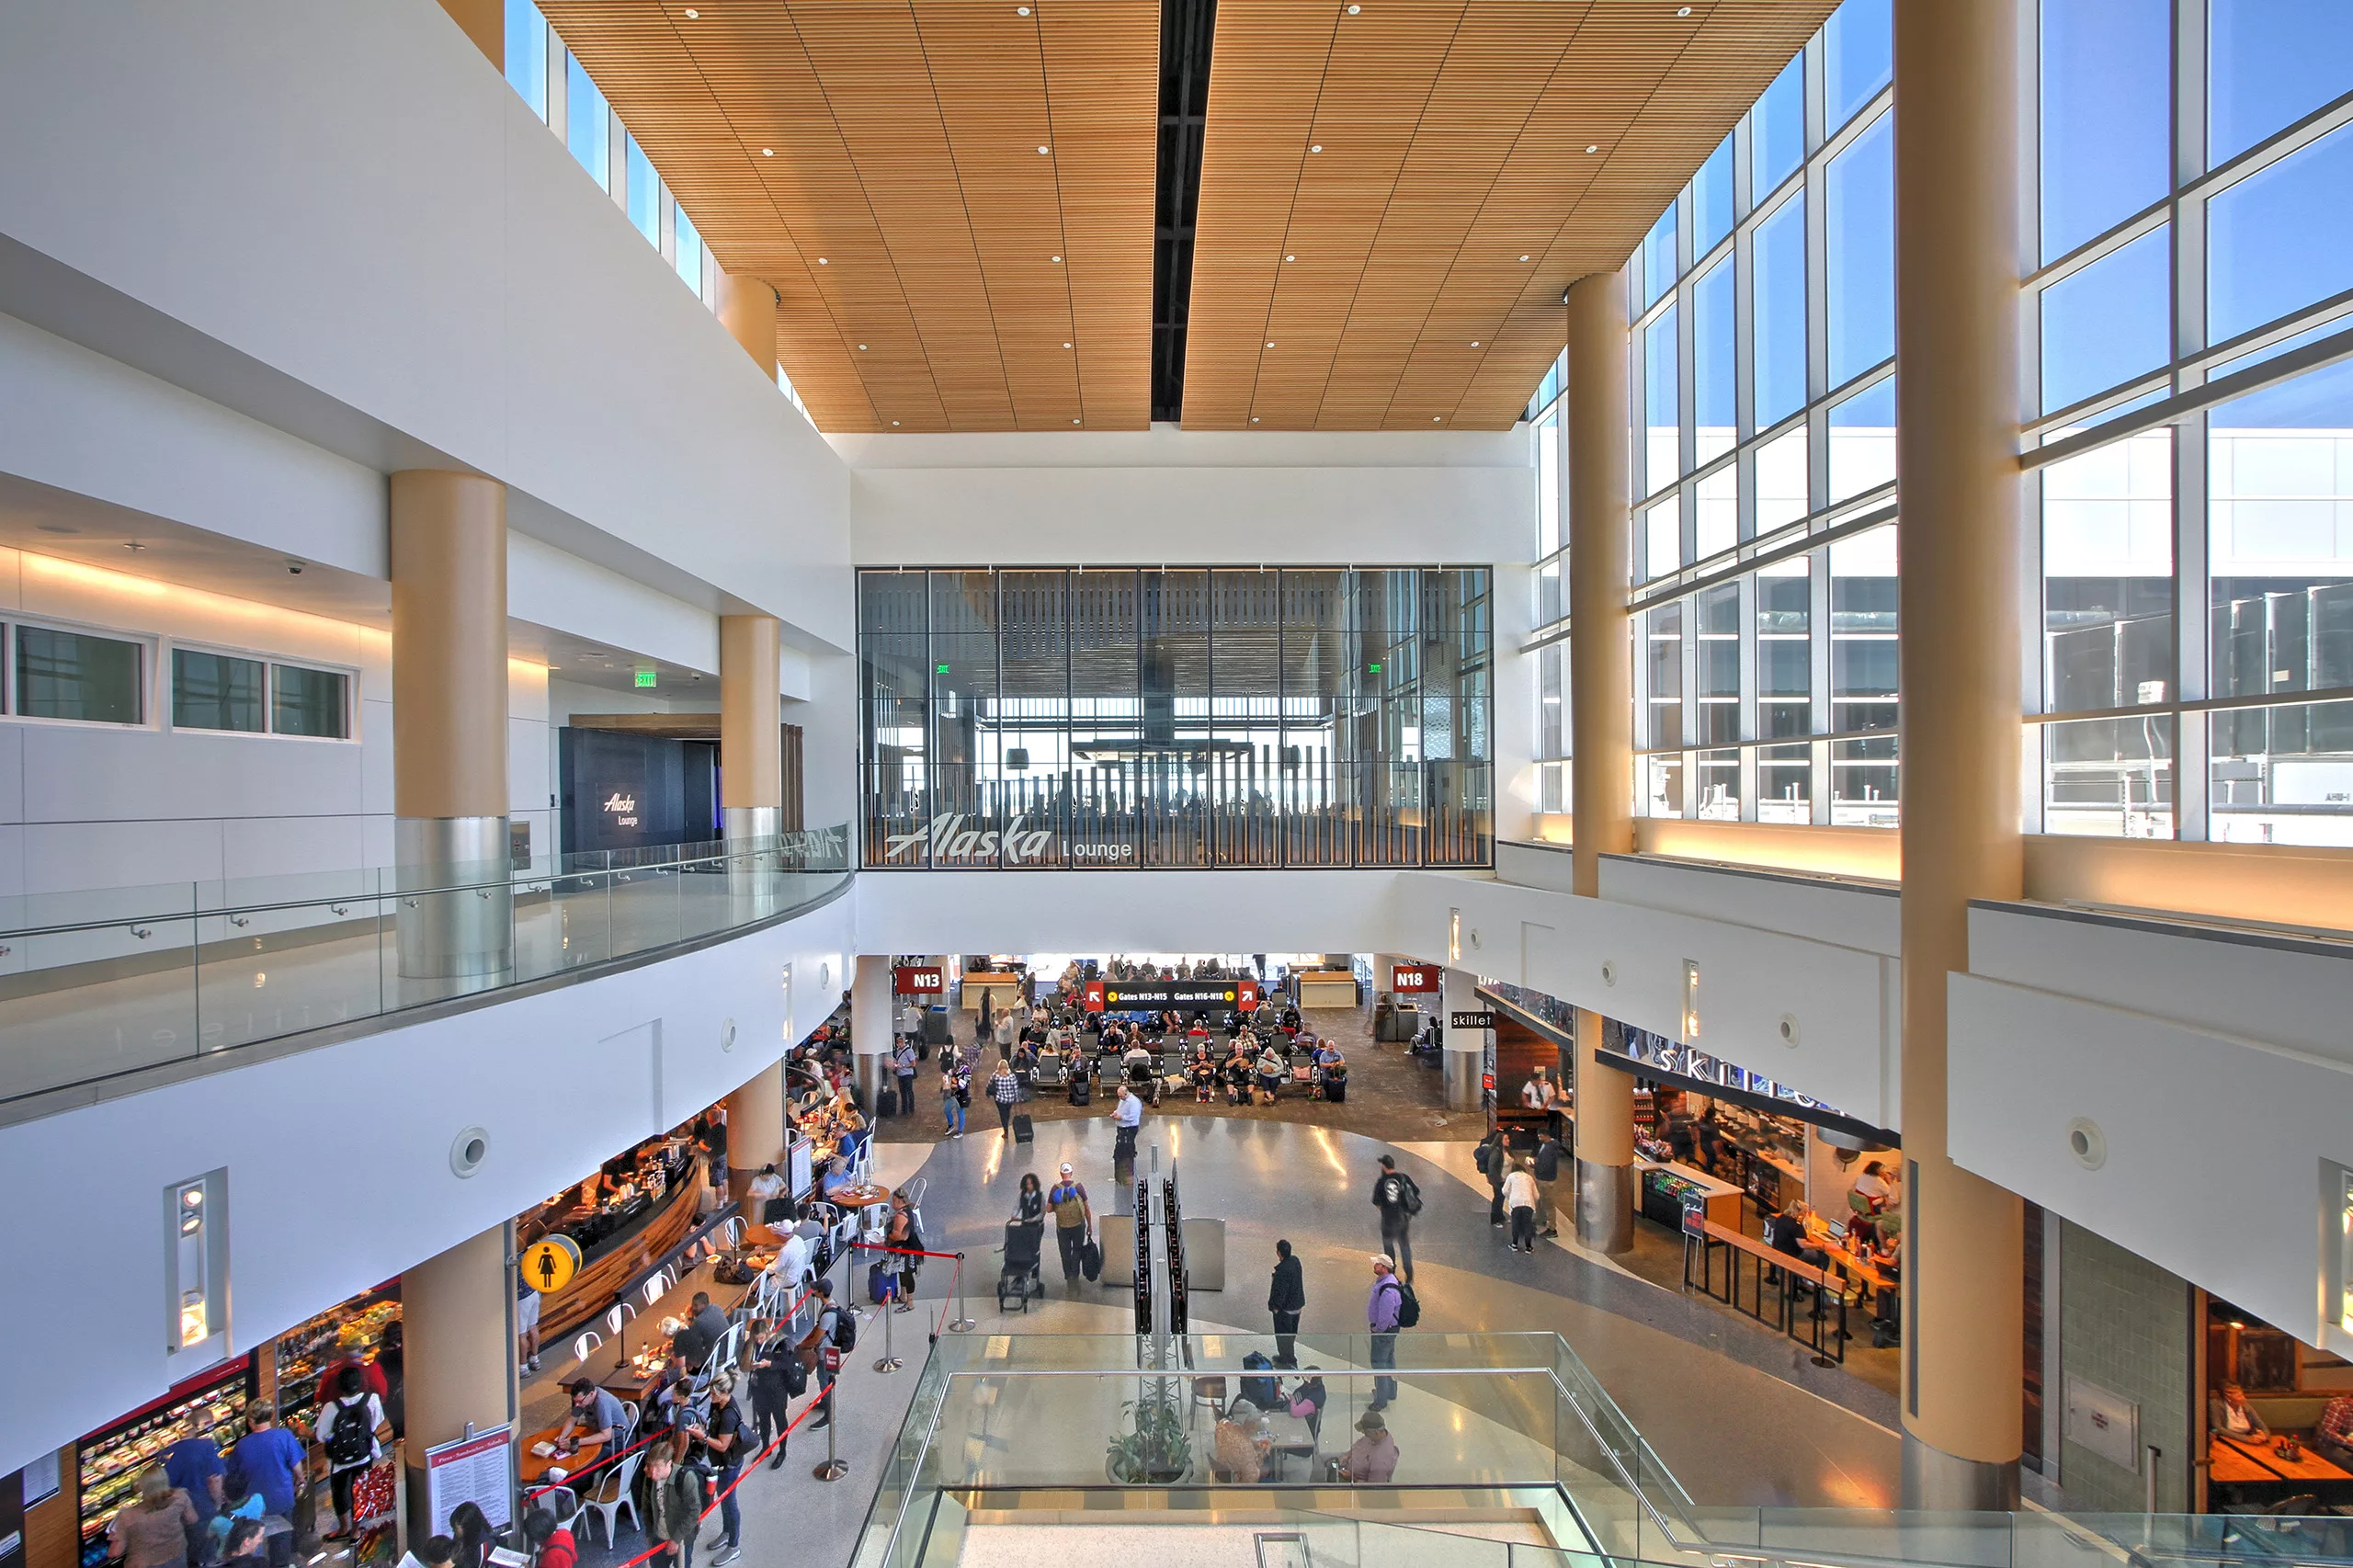 Interior view of the Sea-Tac International Airport North Satellite Modernization Project with the glass-enclosed Alaska Lounge above a concourse filled with travelers and shops